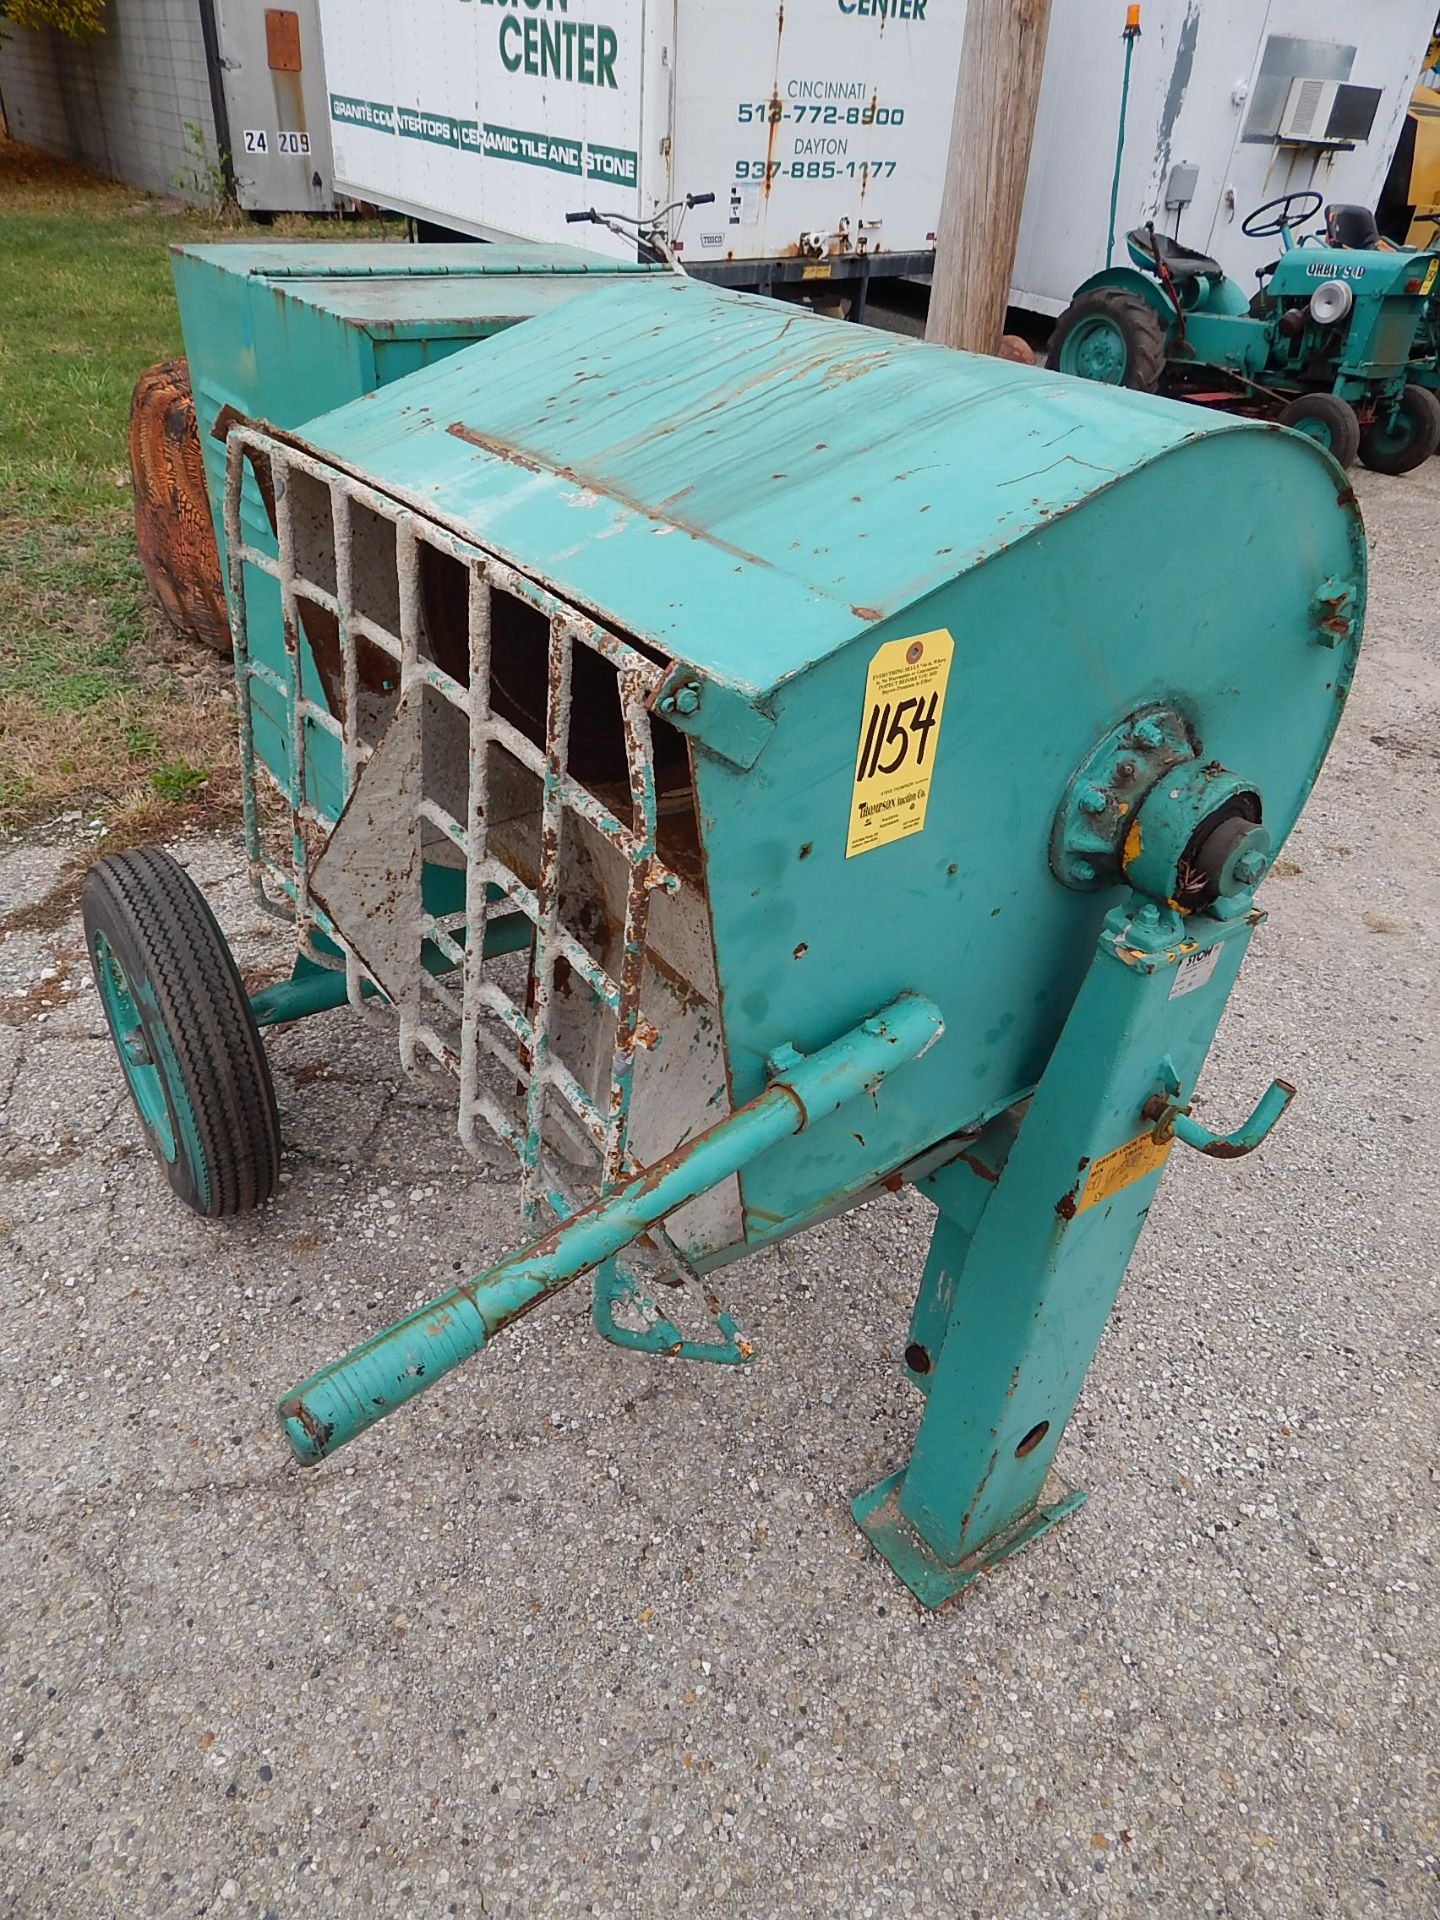 Stow Model 20 B Gas-Powered Mortar Mixer s/n 8605439, Briggs & Stratton 7 HP Engine